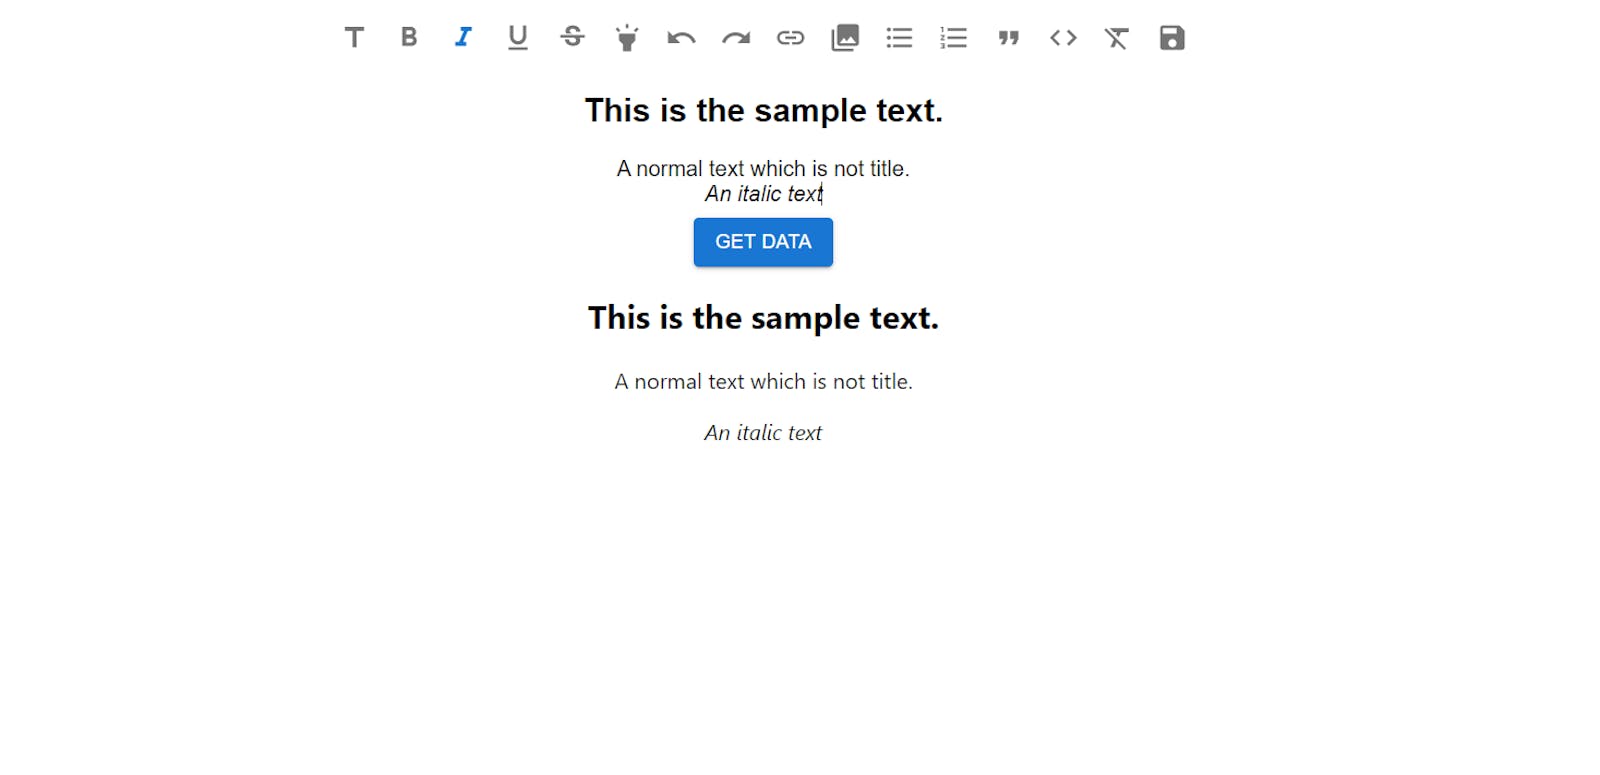 Create a text editor in React using Material UI